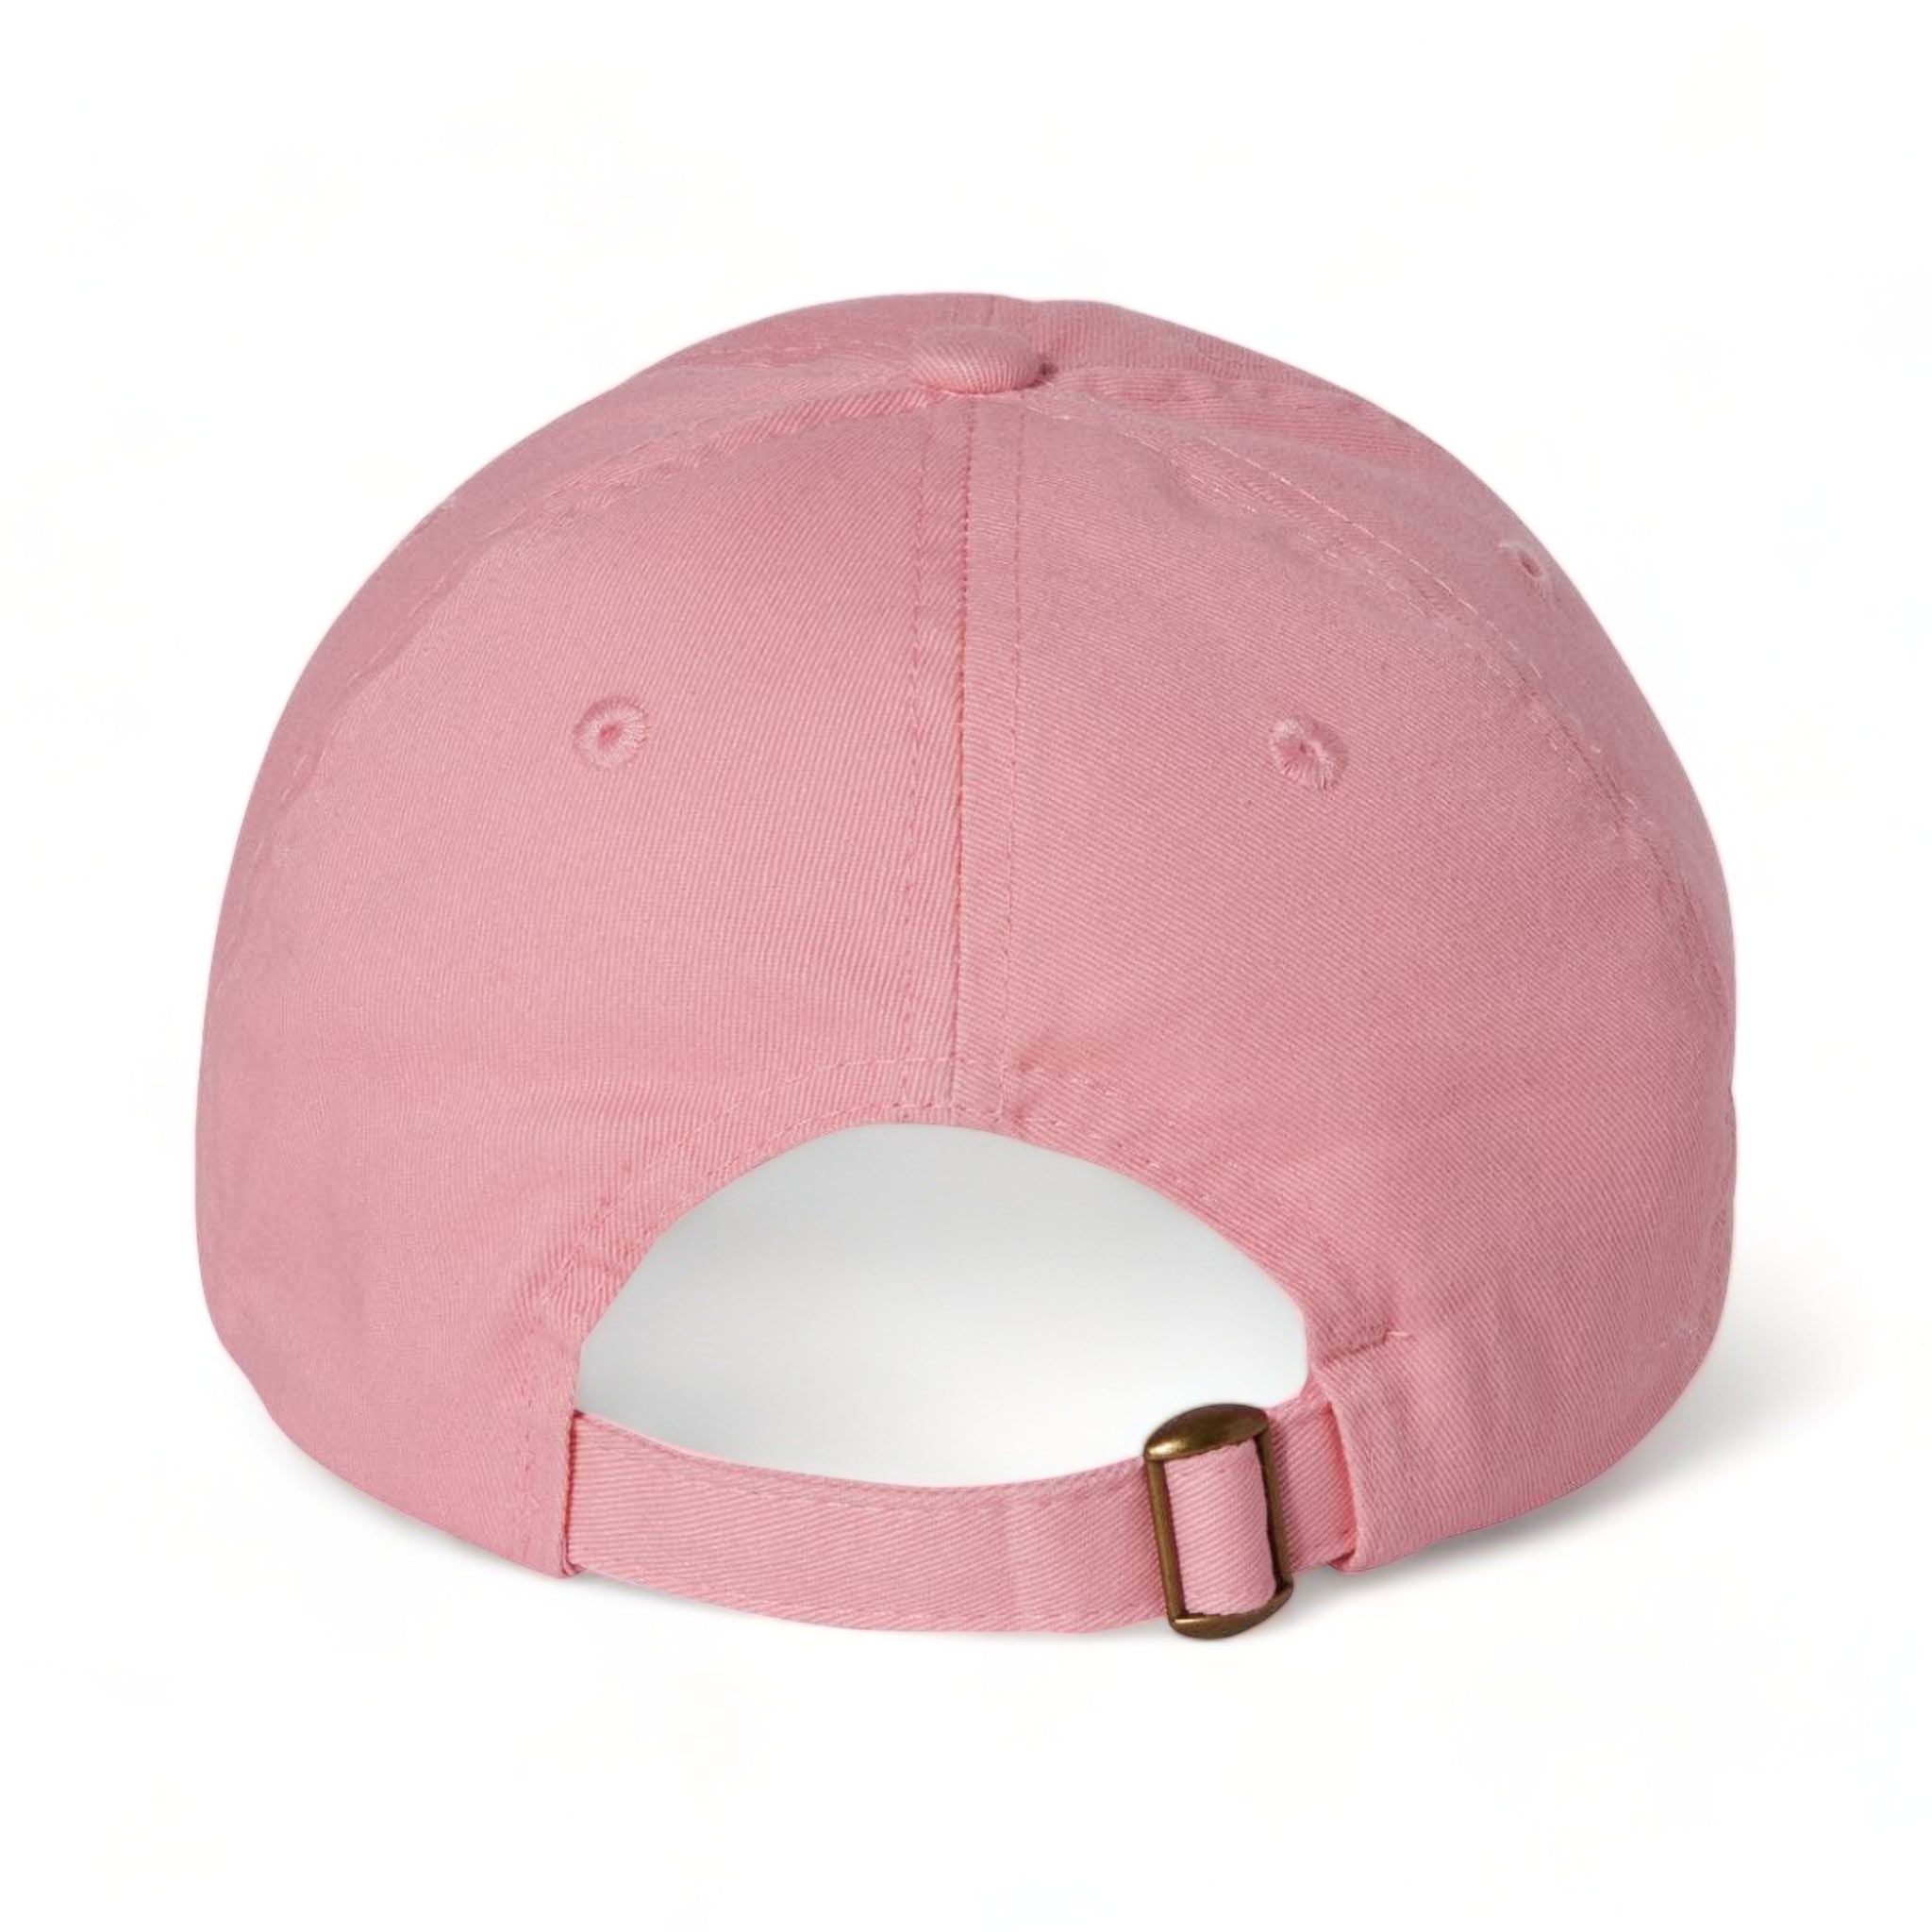 Back view of Valucap VC300A custom hat in pink